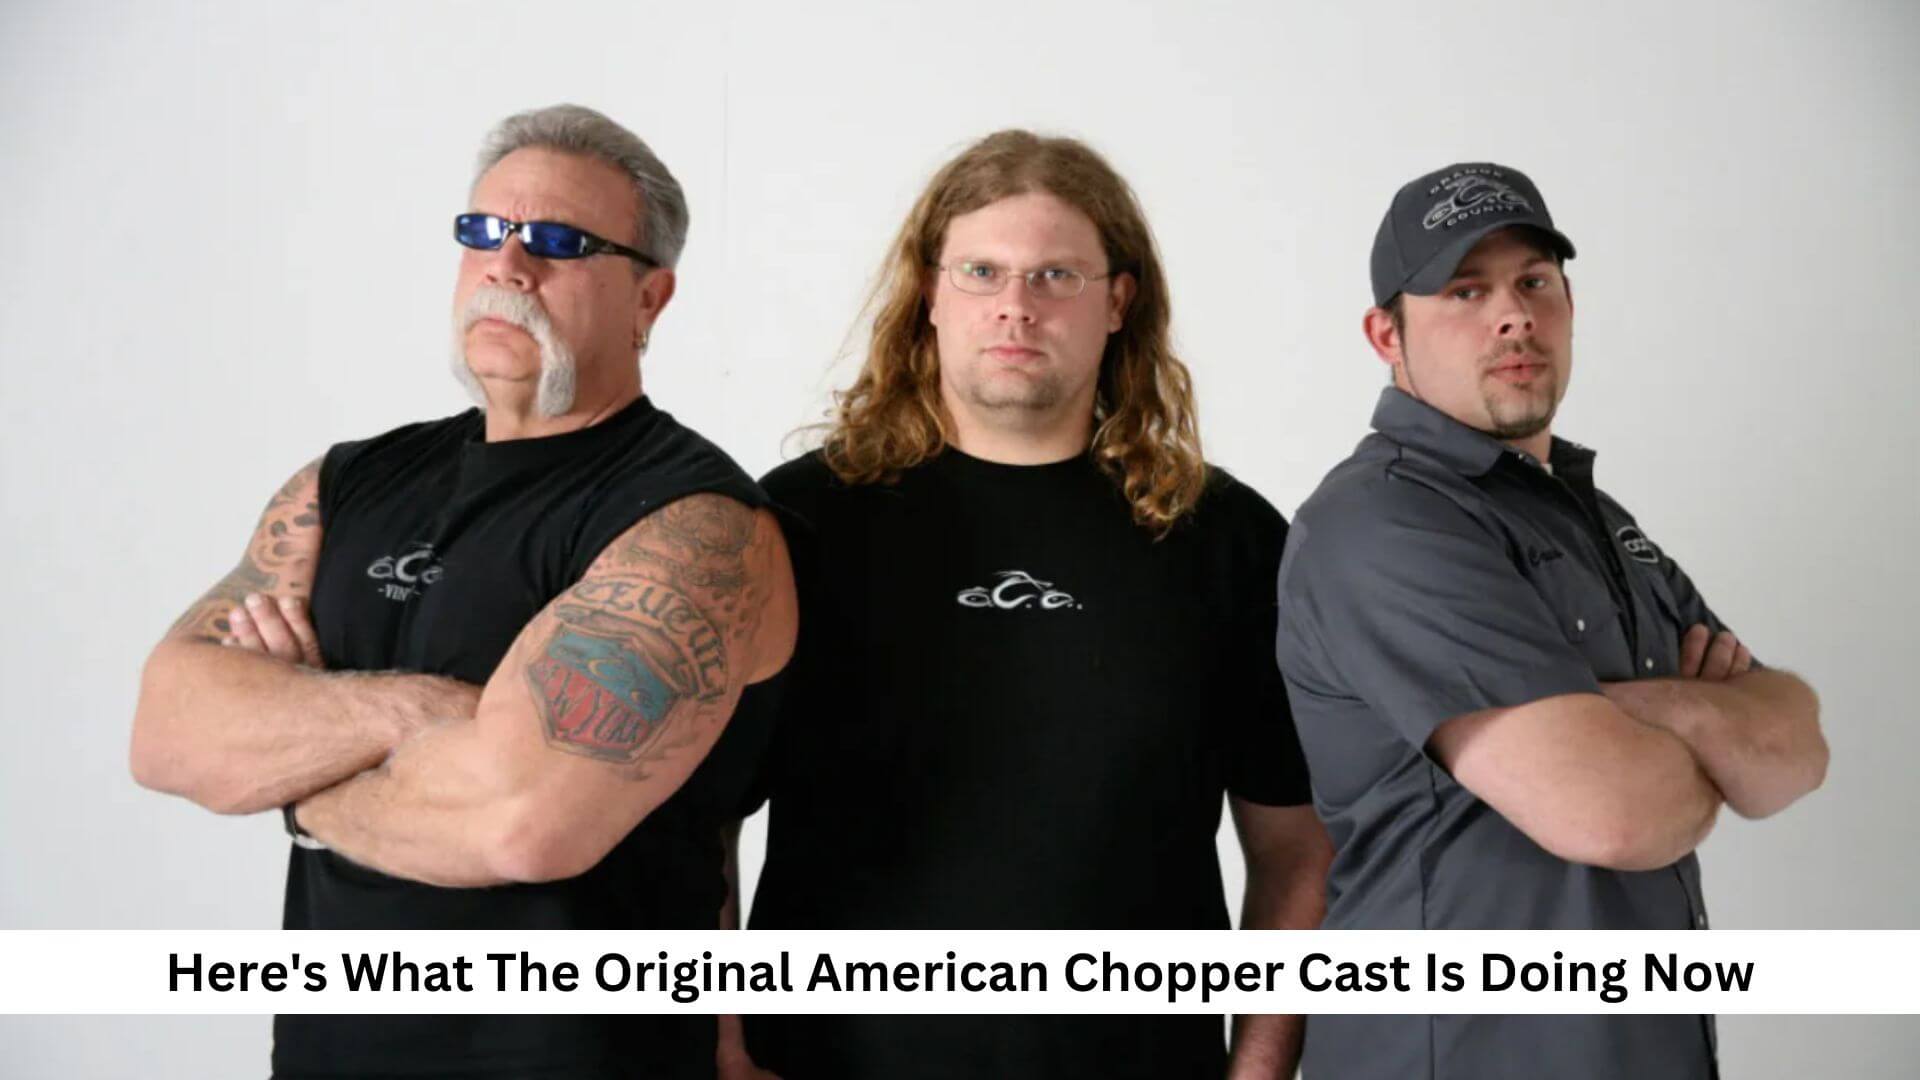 Here's What The Original American Chopper Cast Is Doing Now